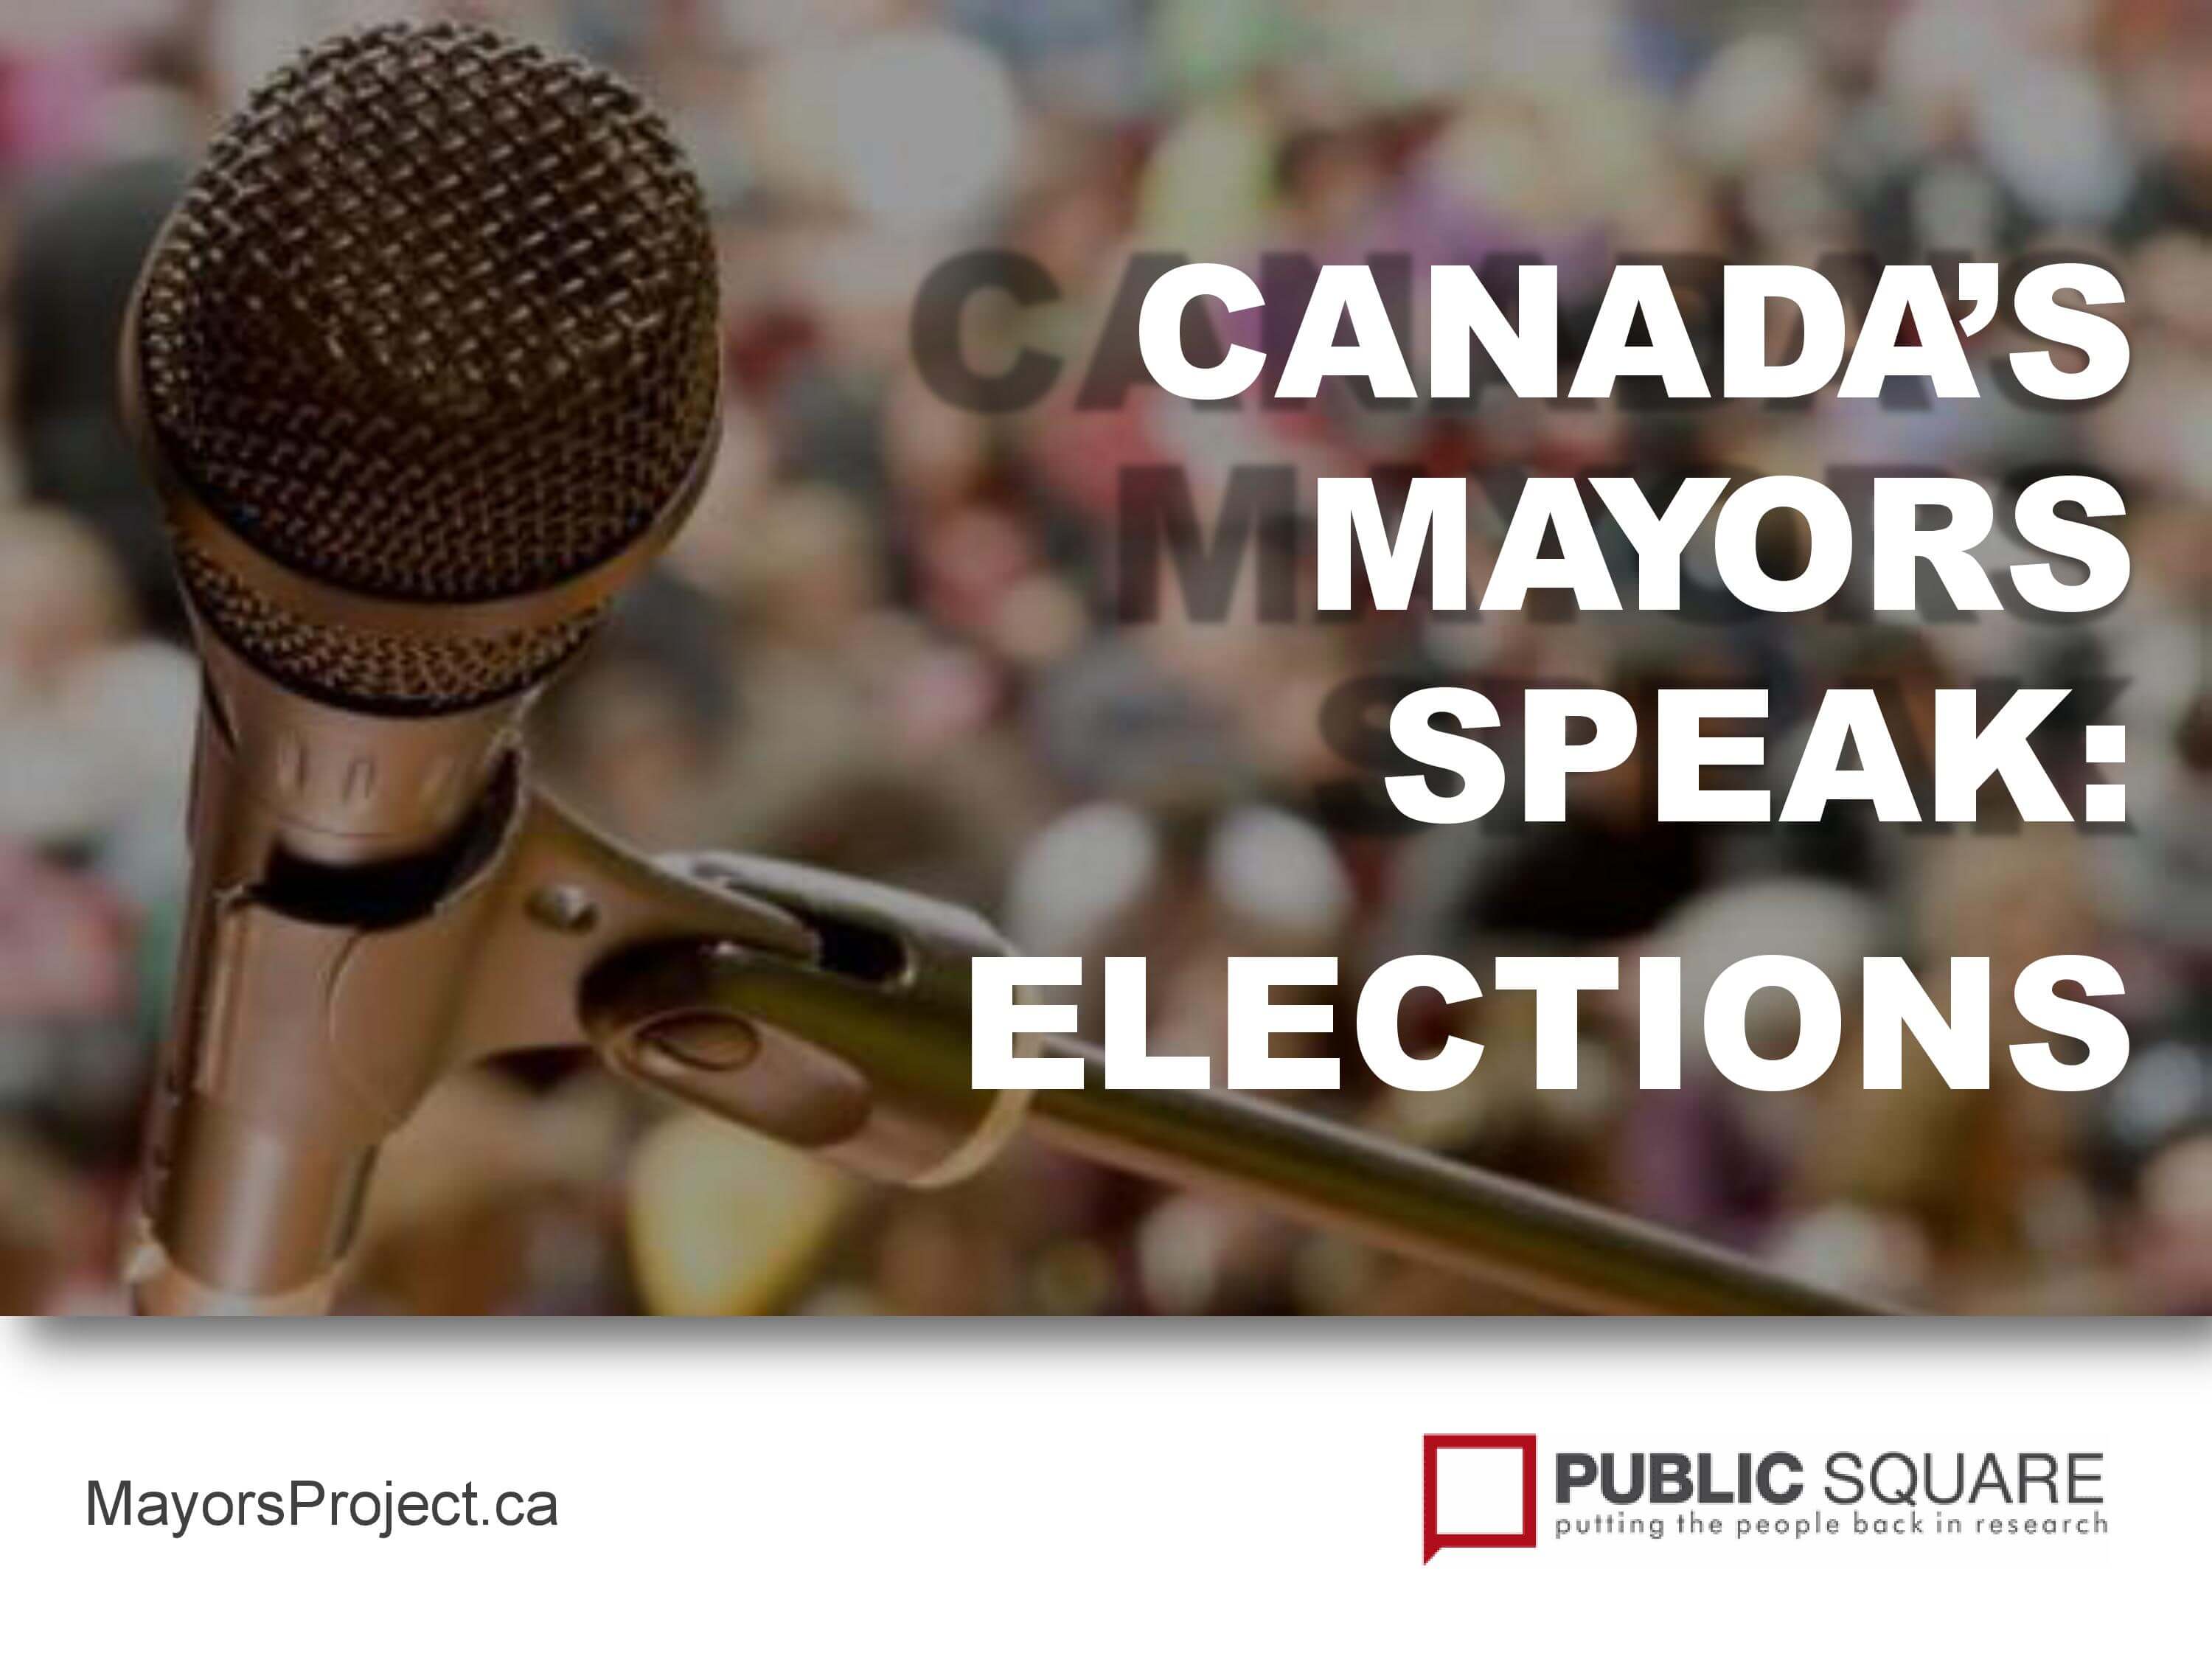 Canada's Mayors Speak About Elections Report